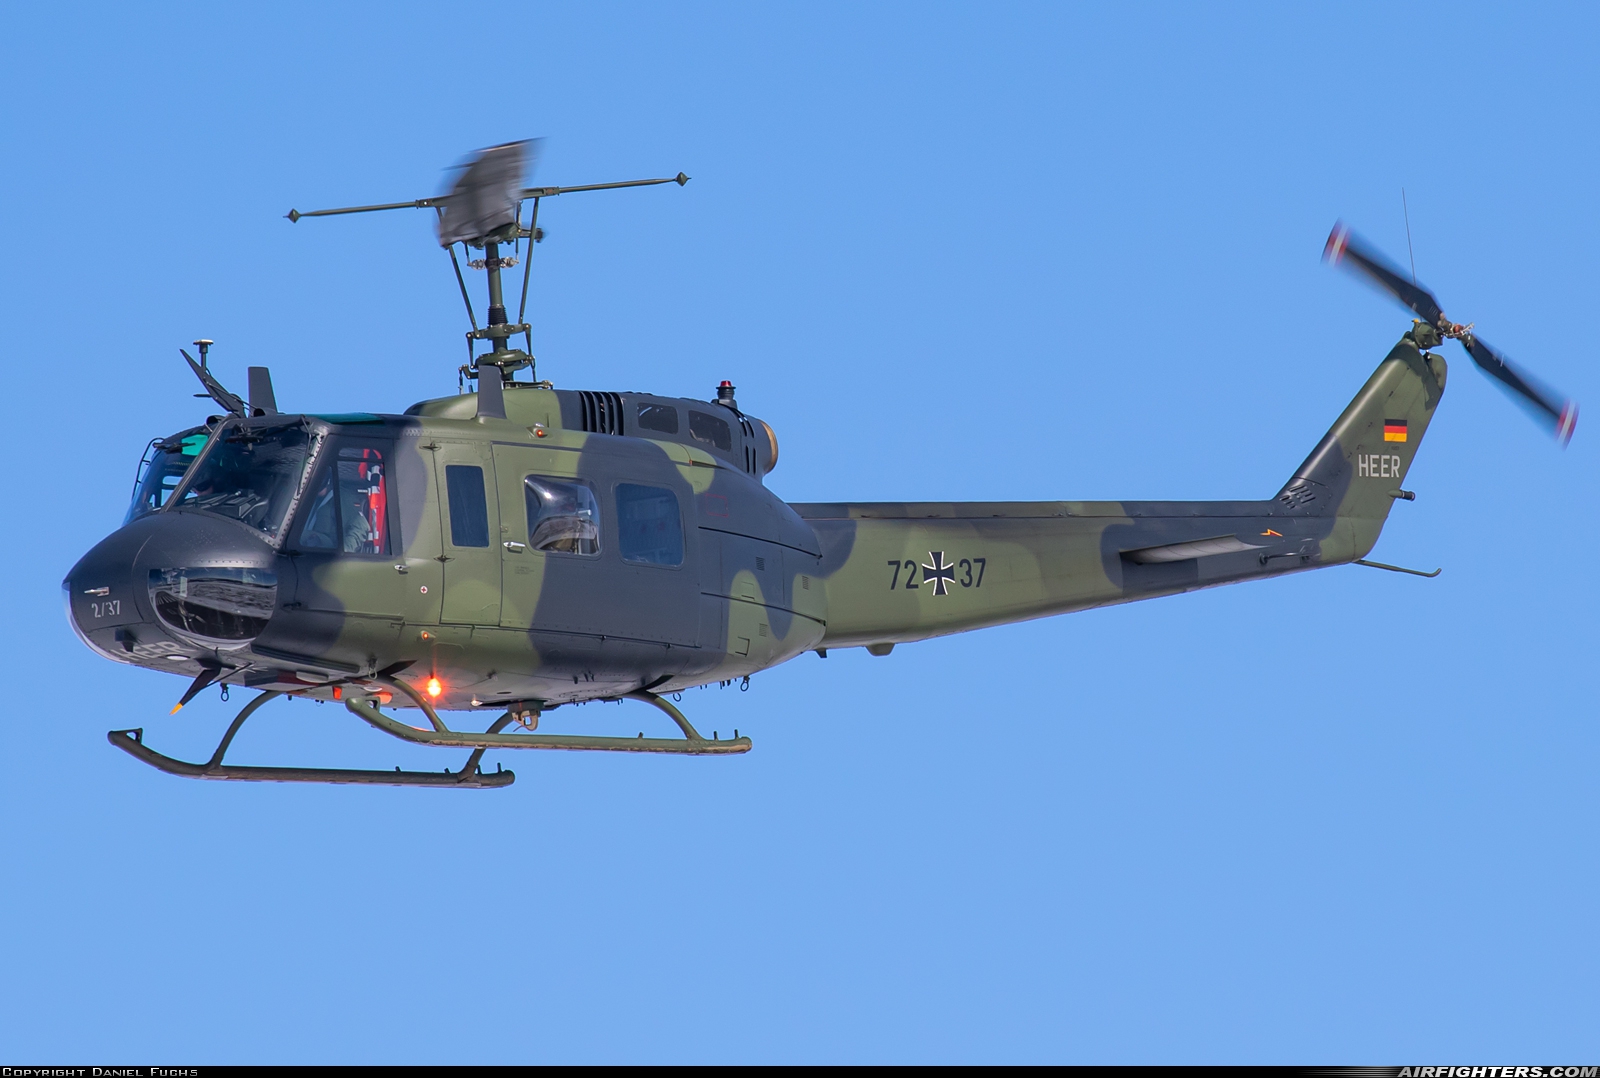 Germany - Army Bell UH-1D Iroquois (205) 72+37 at Niederstetten (ETHN), Germany